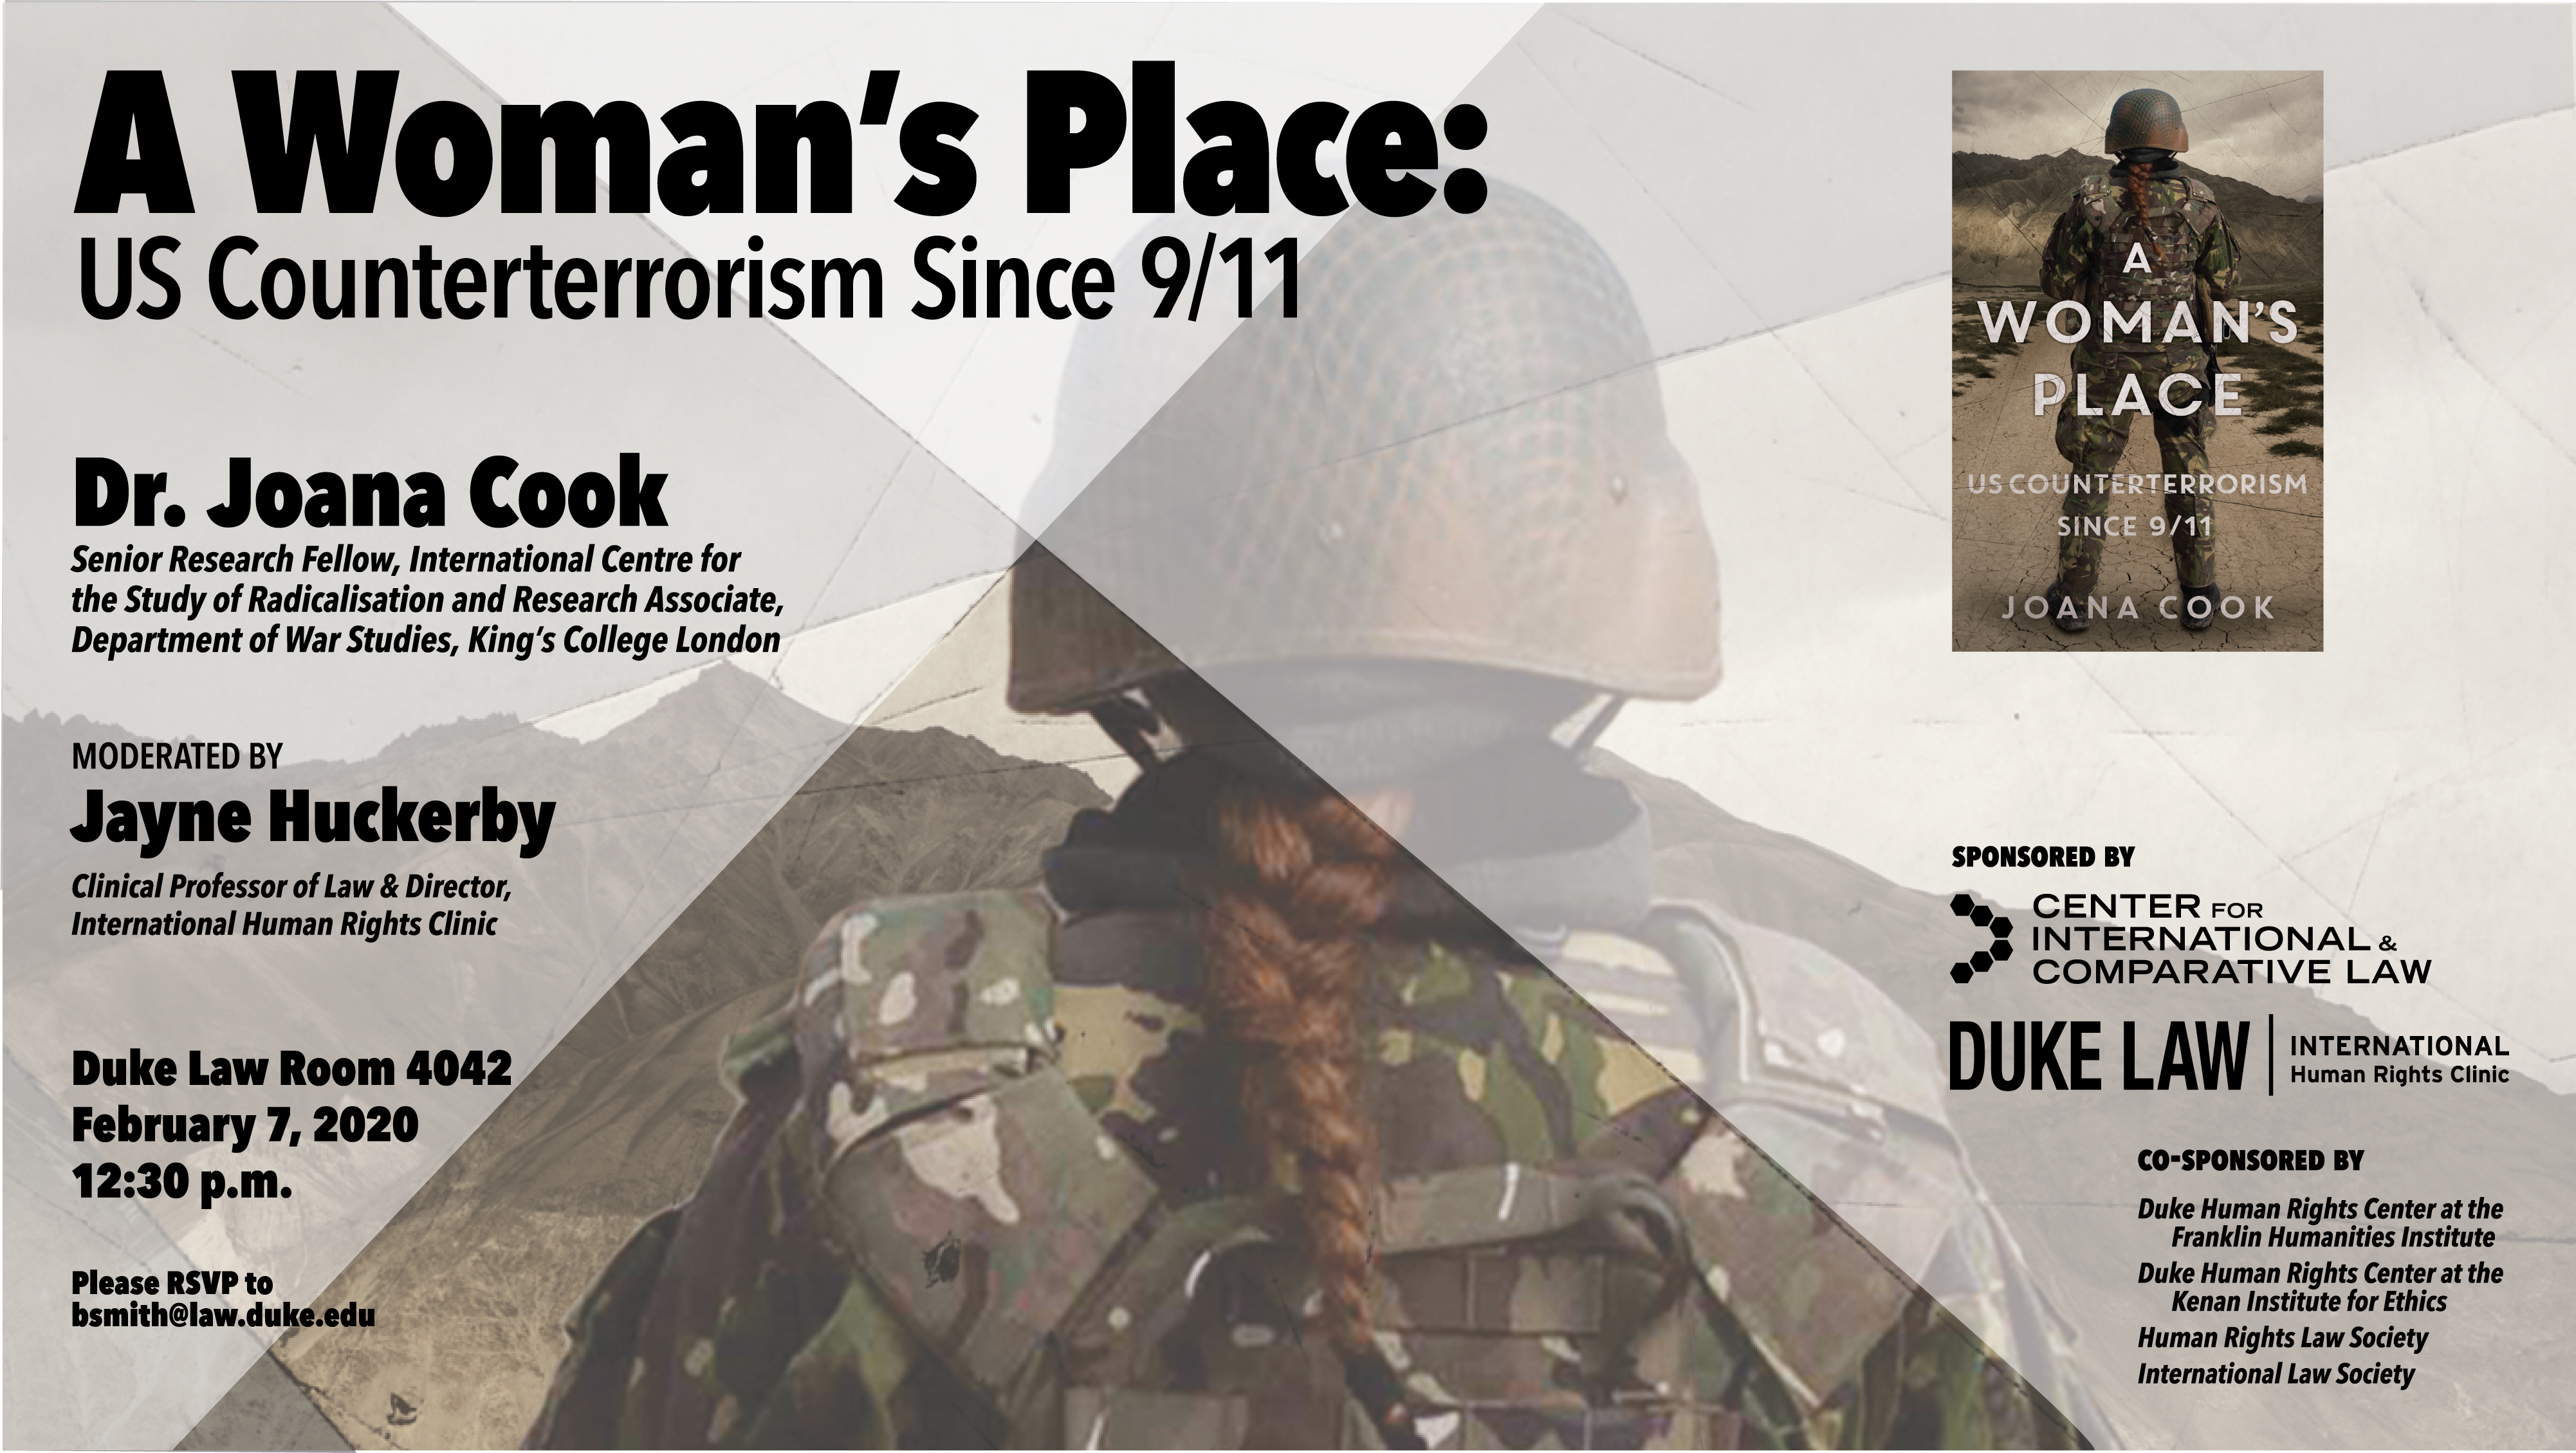 Human rights in Practice -- Book Talk -- A Woman's Place: US Counterterrorism Since 9/11; with Dr. Joana Cook